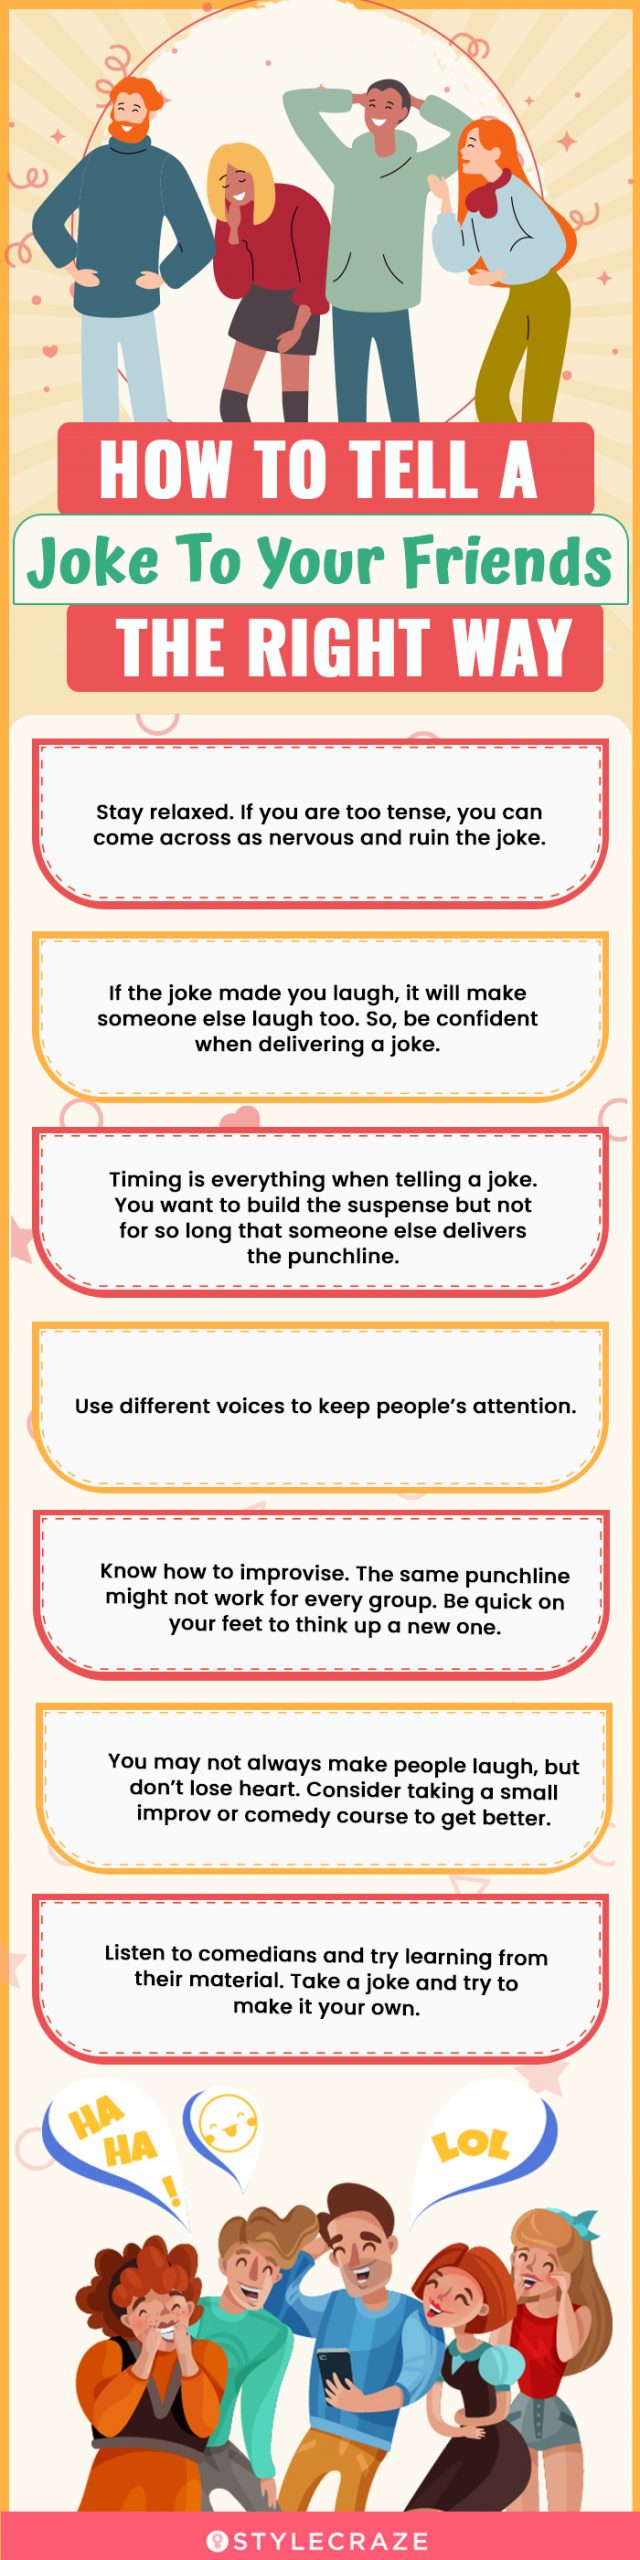 how to tell a joke to your friends the right way [infographic]